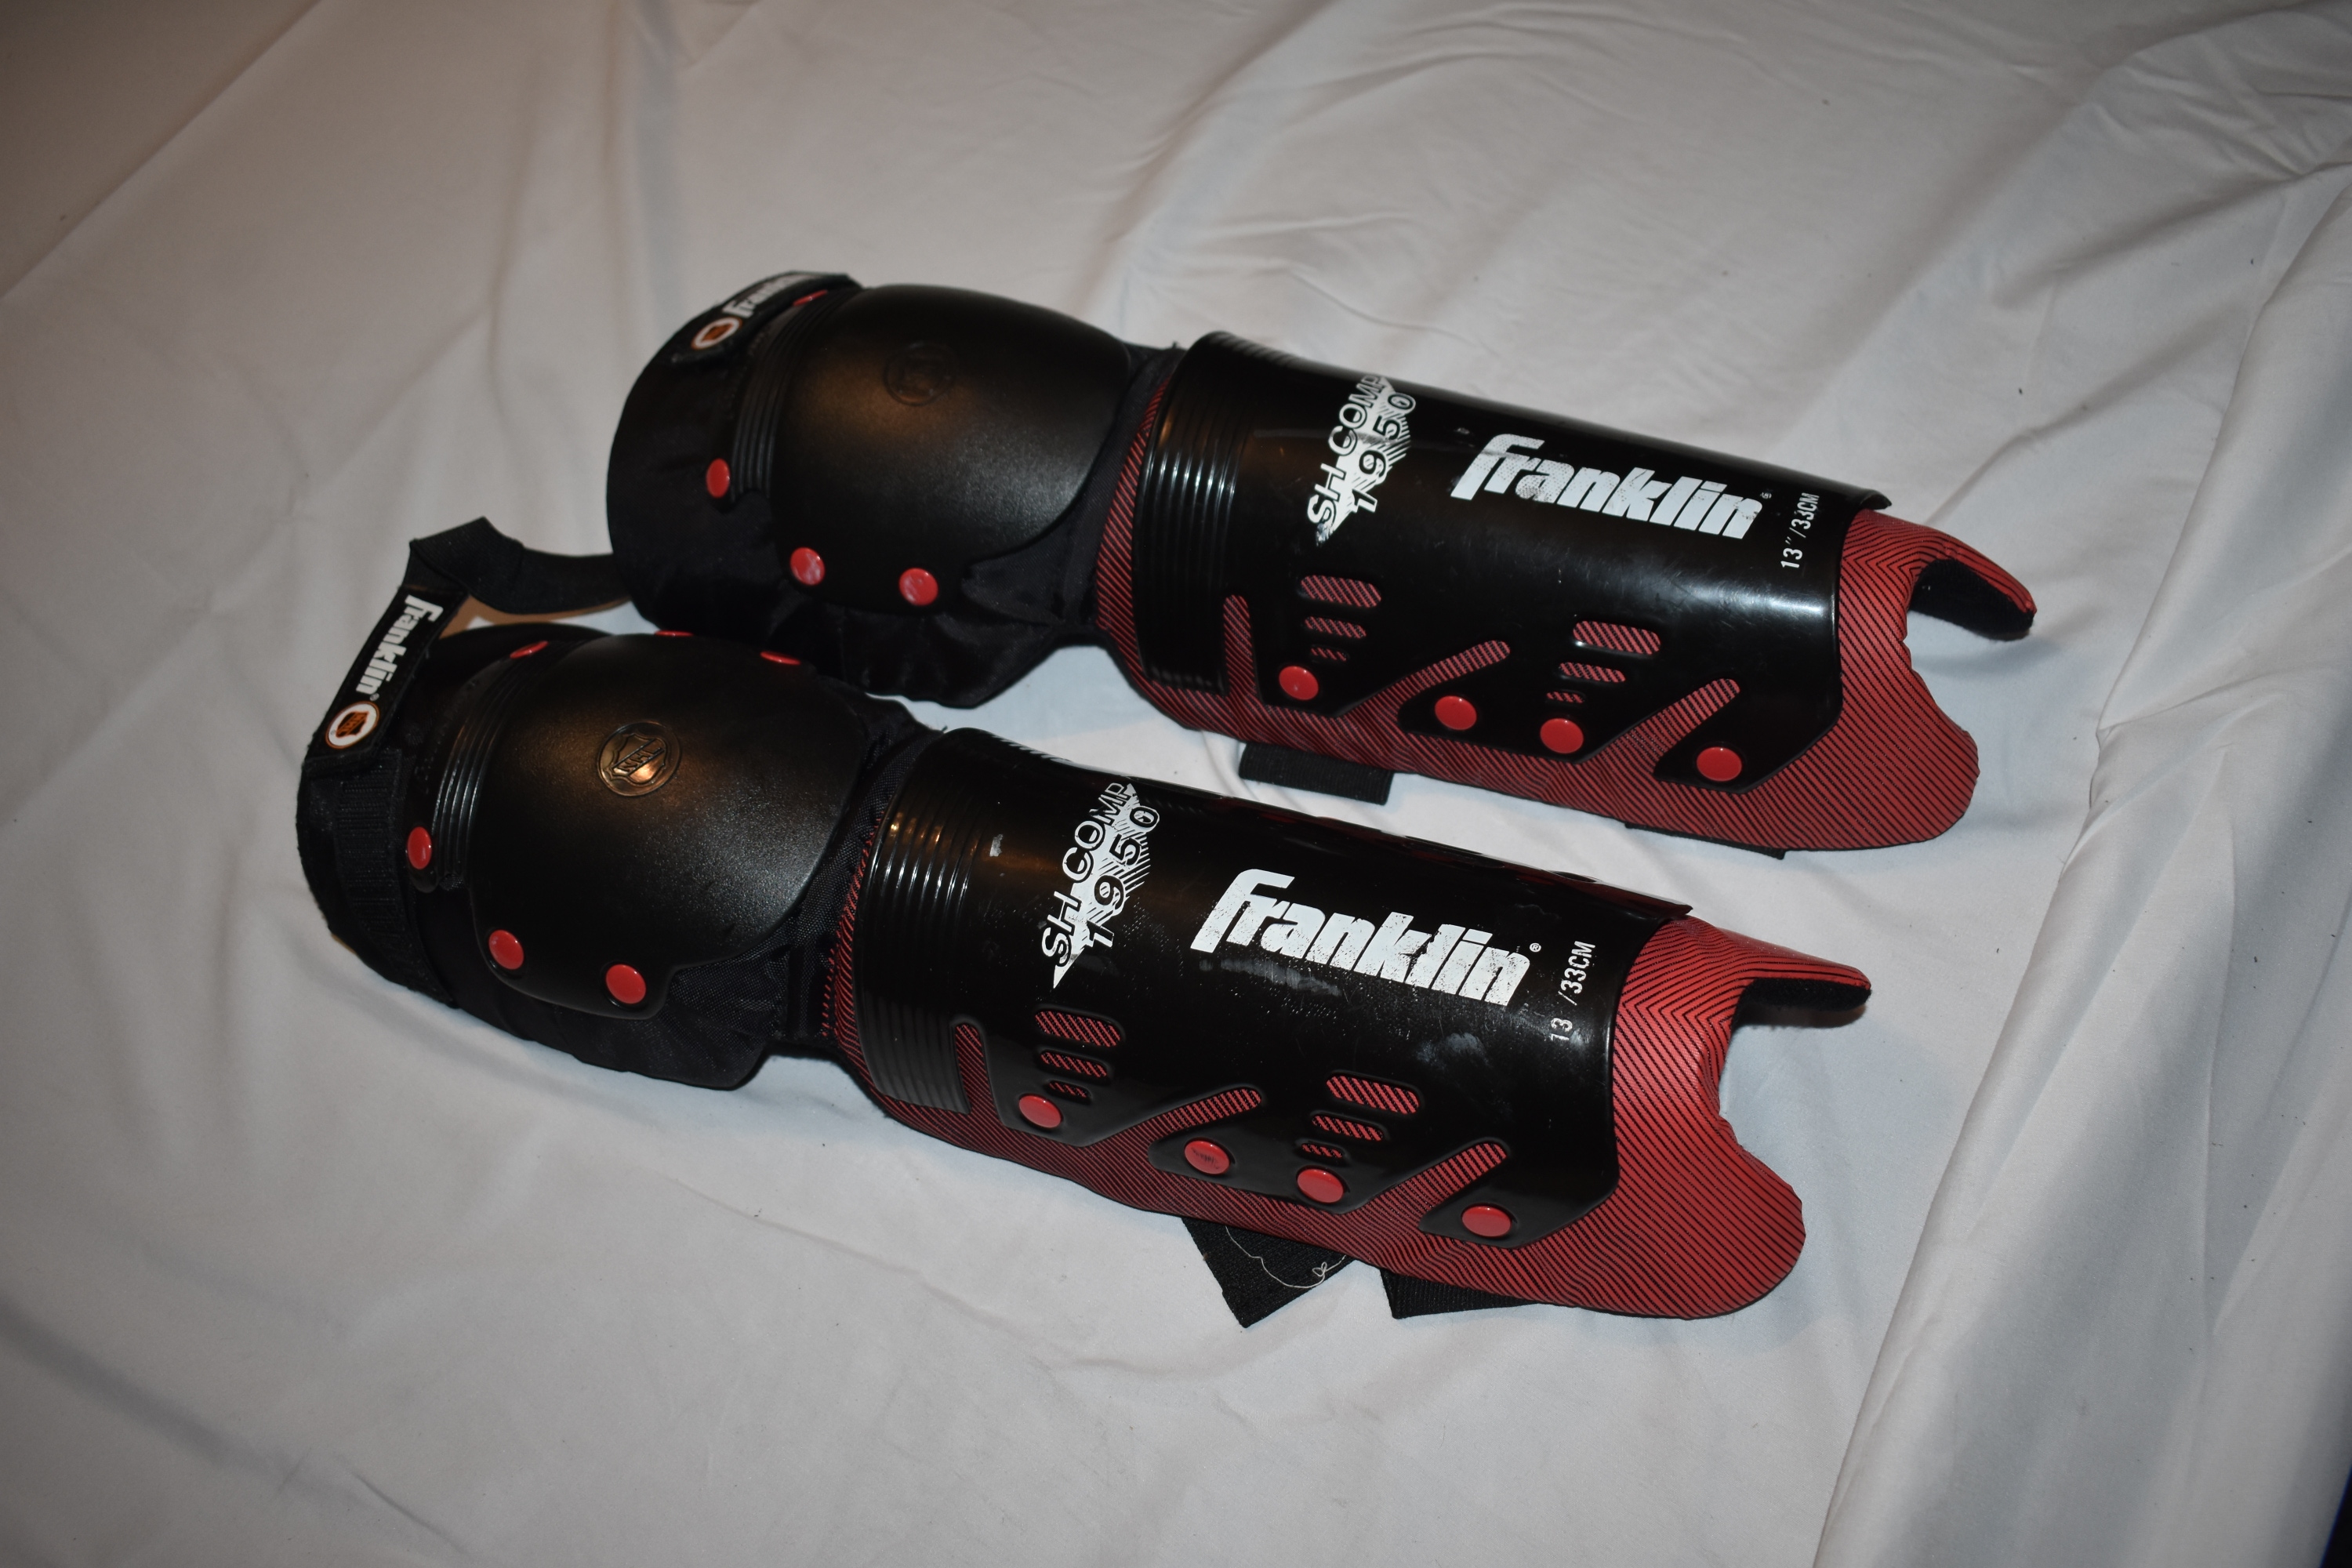 Franklin SH COMP 1950 Hockey Shin Pads, 13 inches - Great Condition!